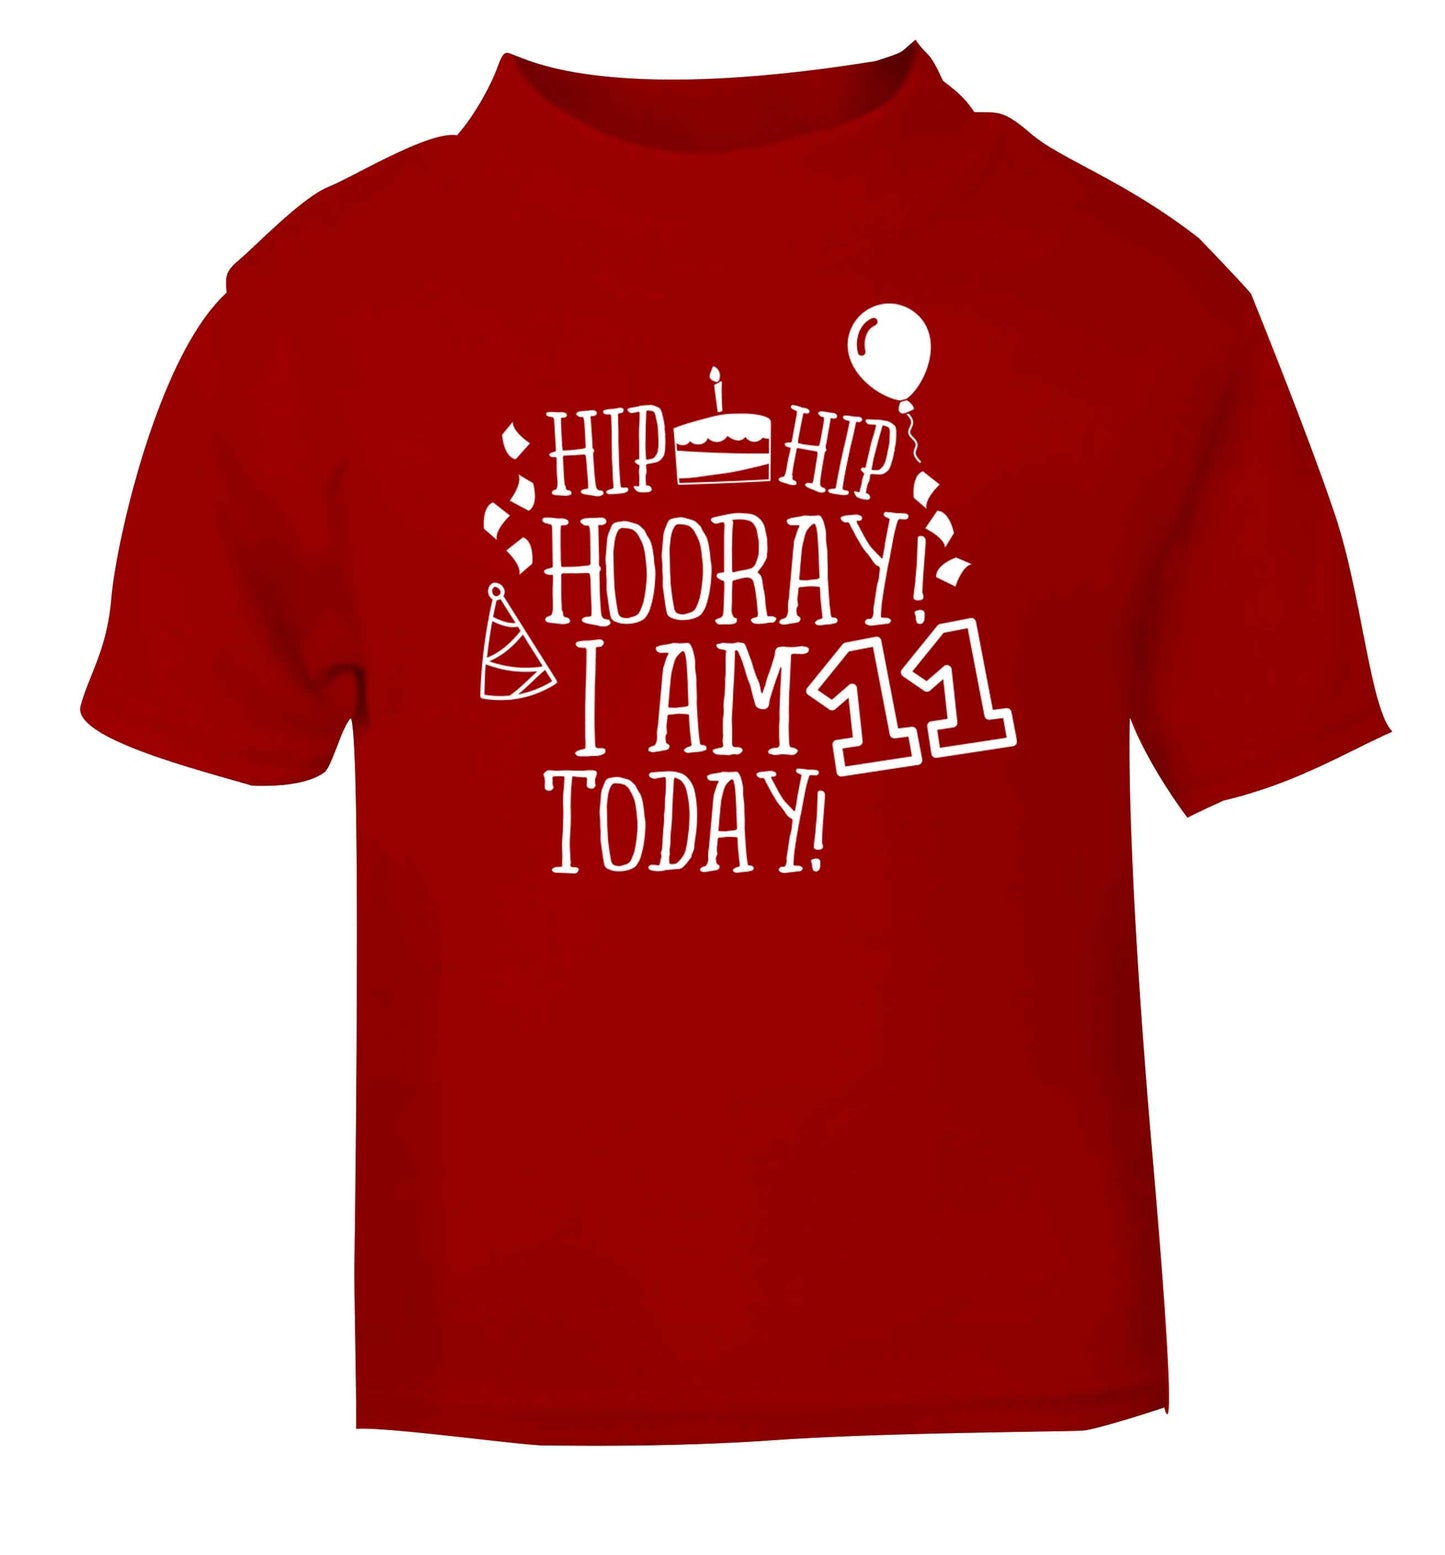 Hip hip hooray I am eleven today! red baby toddler Tshirt 2 Years